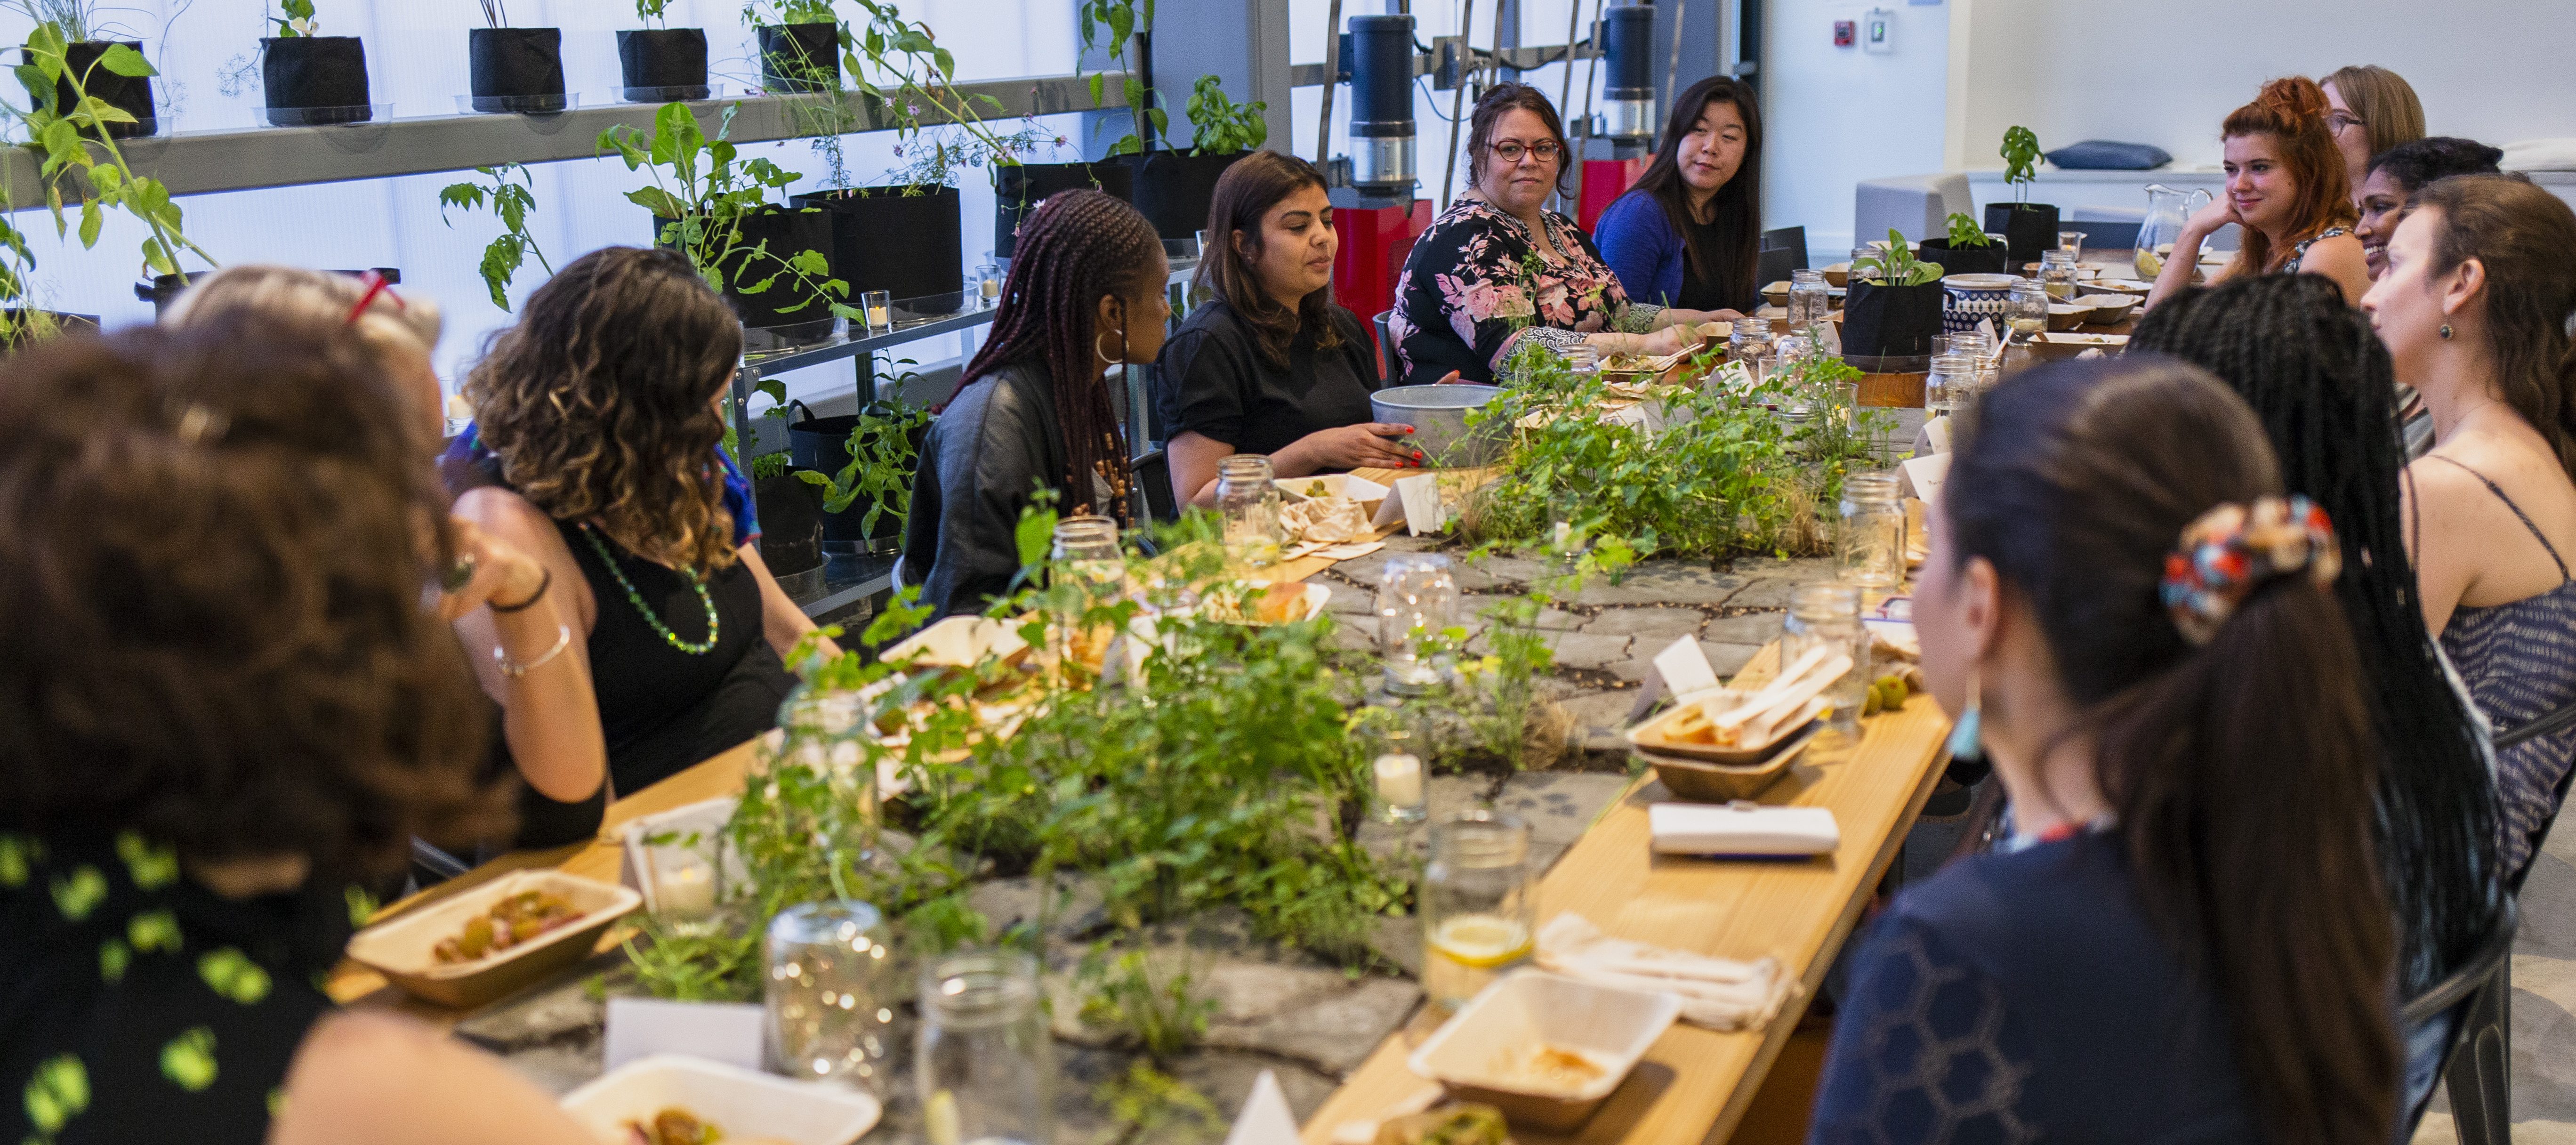 A diverse group of women sit around a long wooden table set with food and a long centerpiece of green, leafy plants sprouting out of gray rocks. Behind them are shelves of green plants growing near a wall of windows, and a white wall.